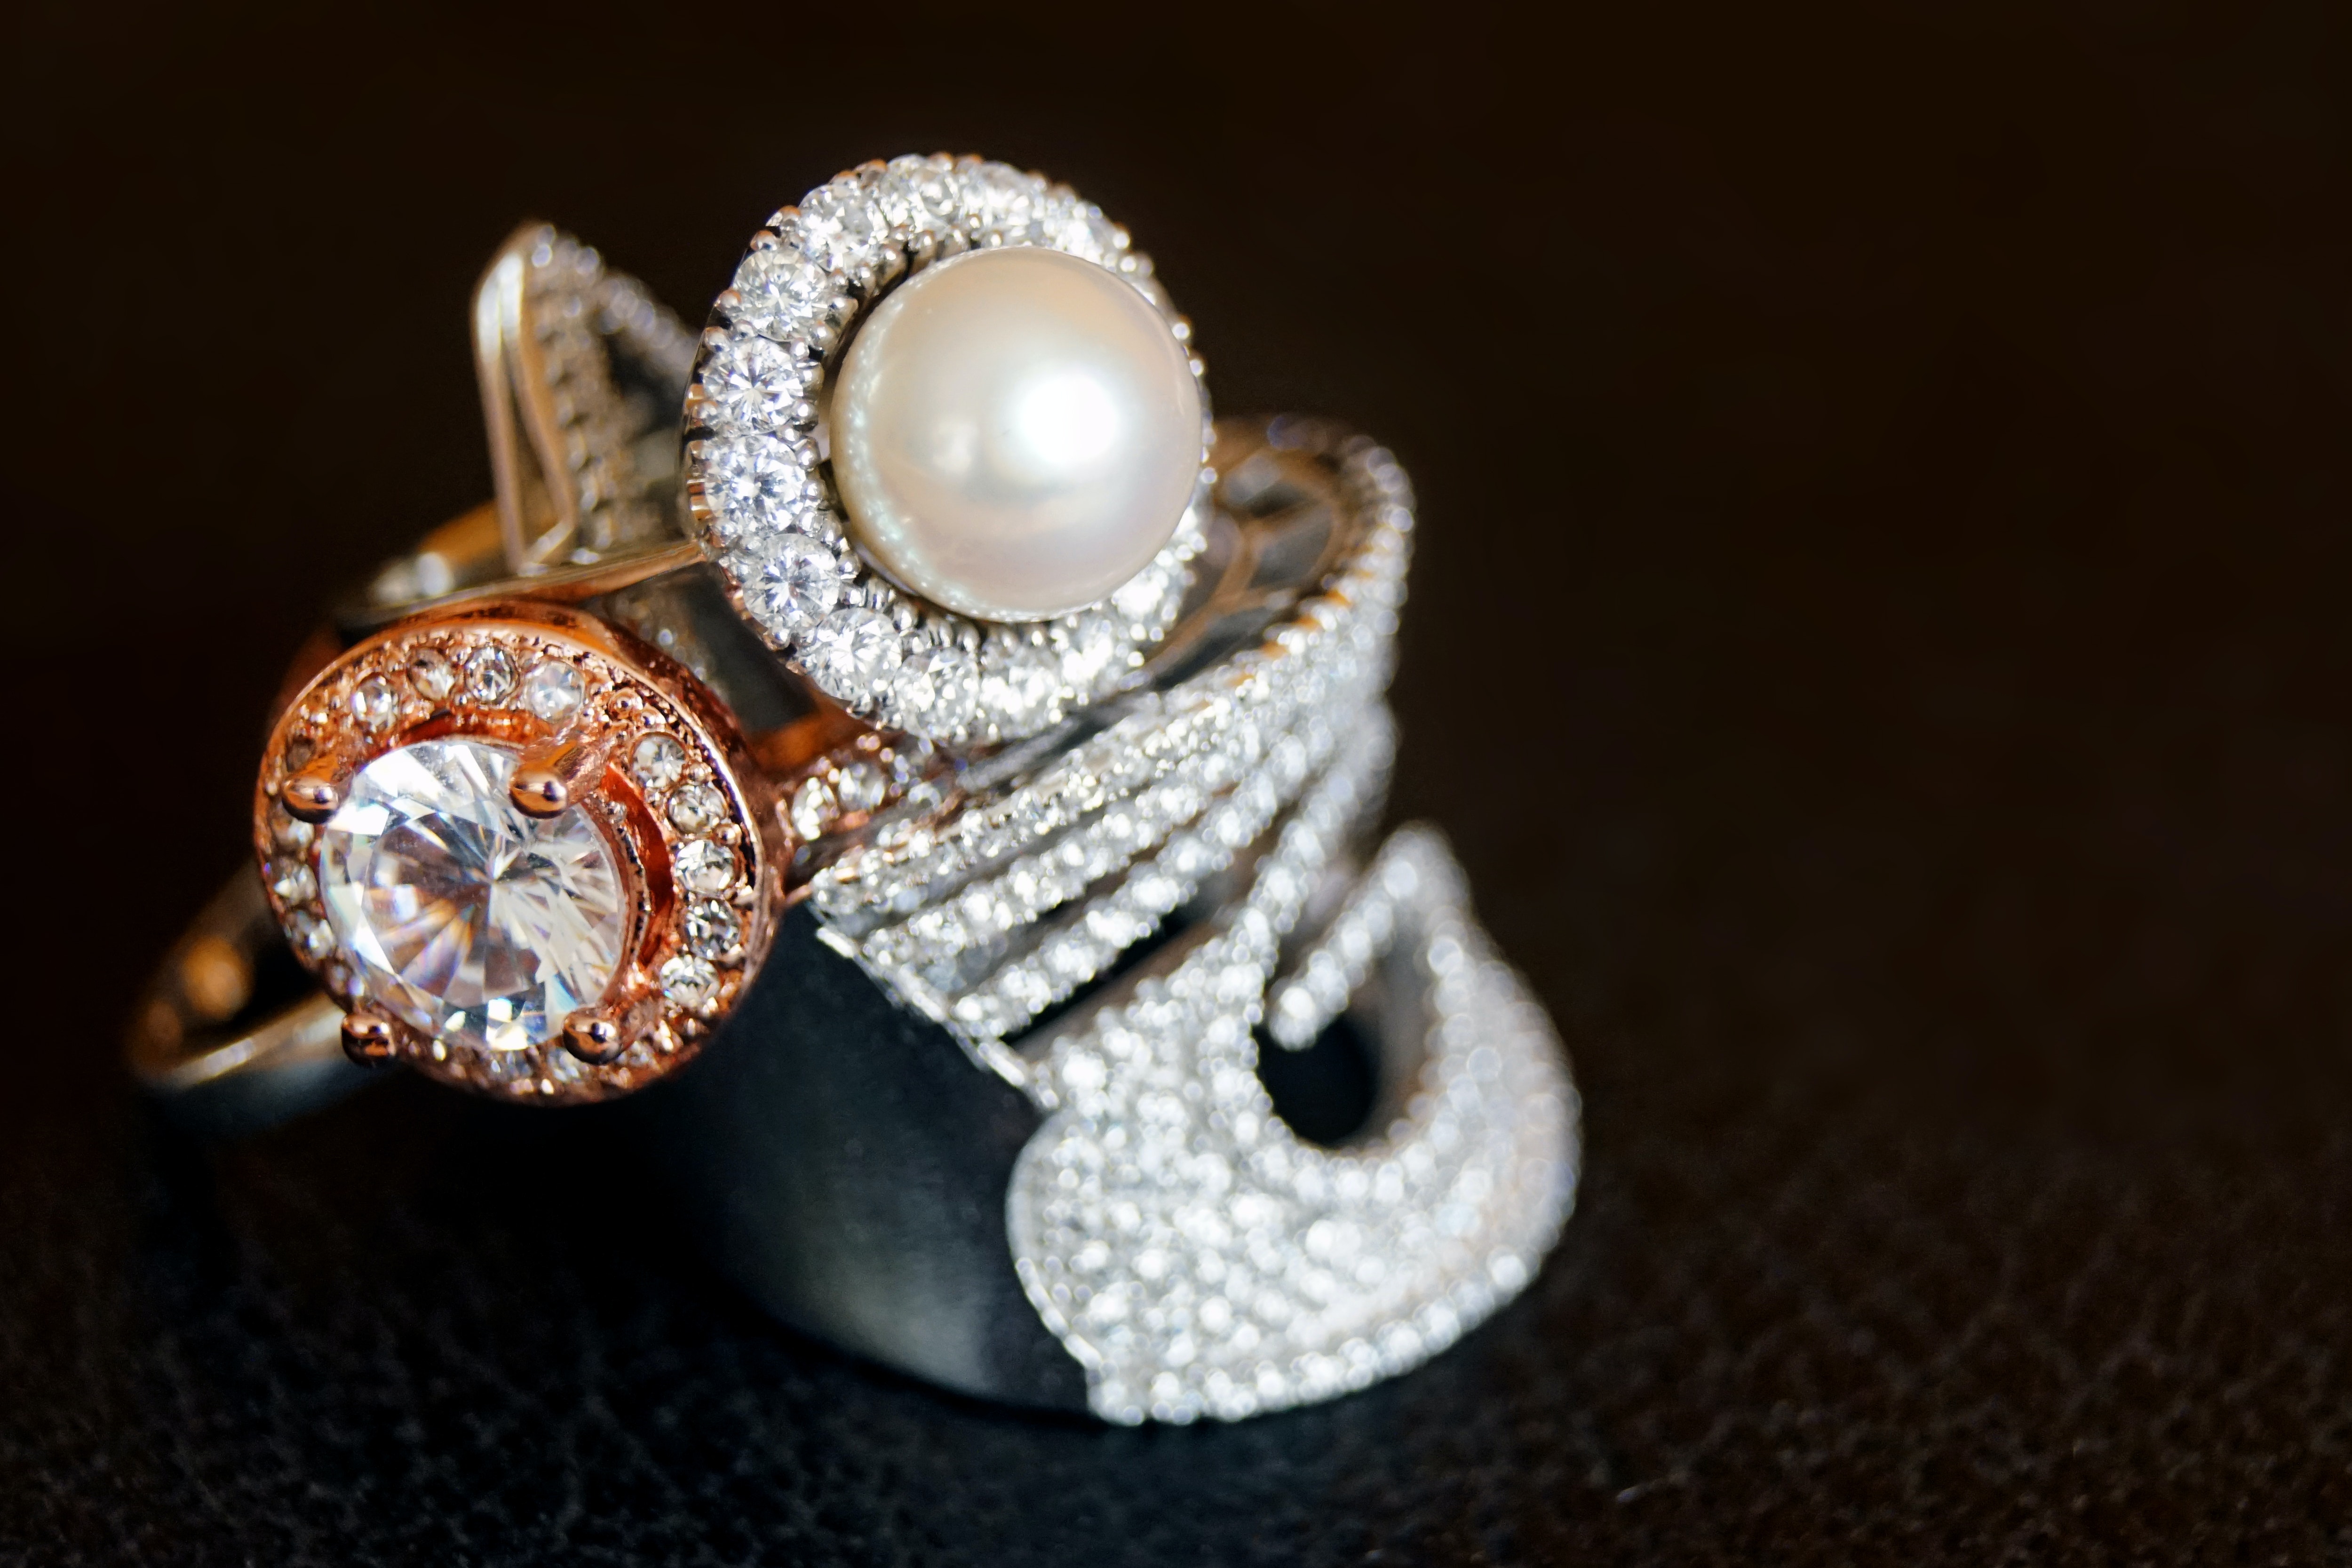 What You Need to Know Before Buying Vintage Engagement Rings